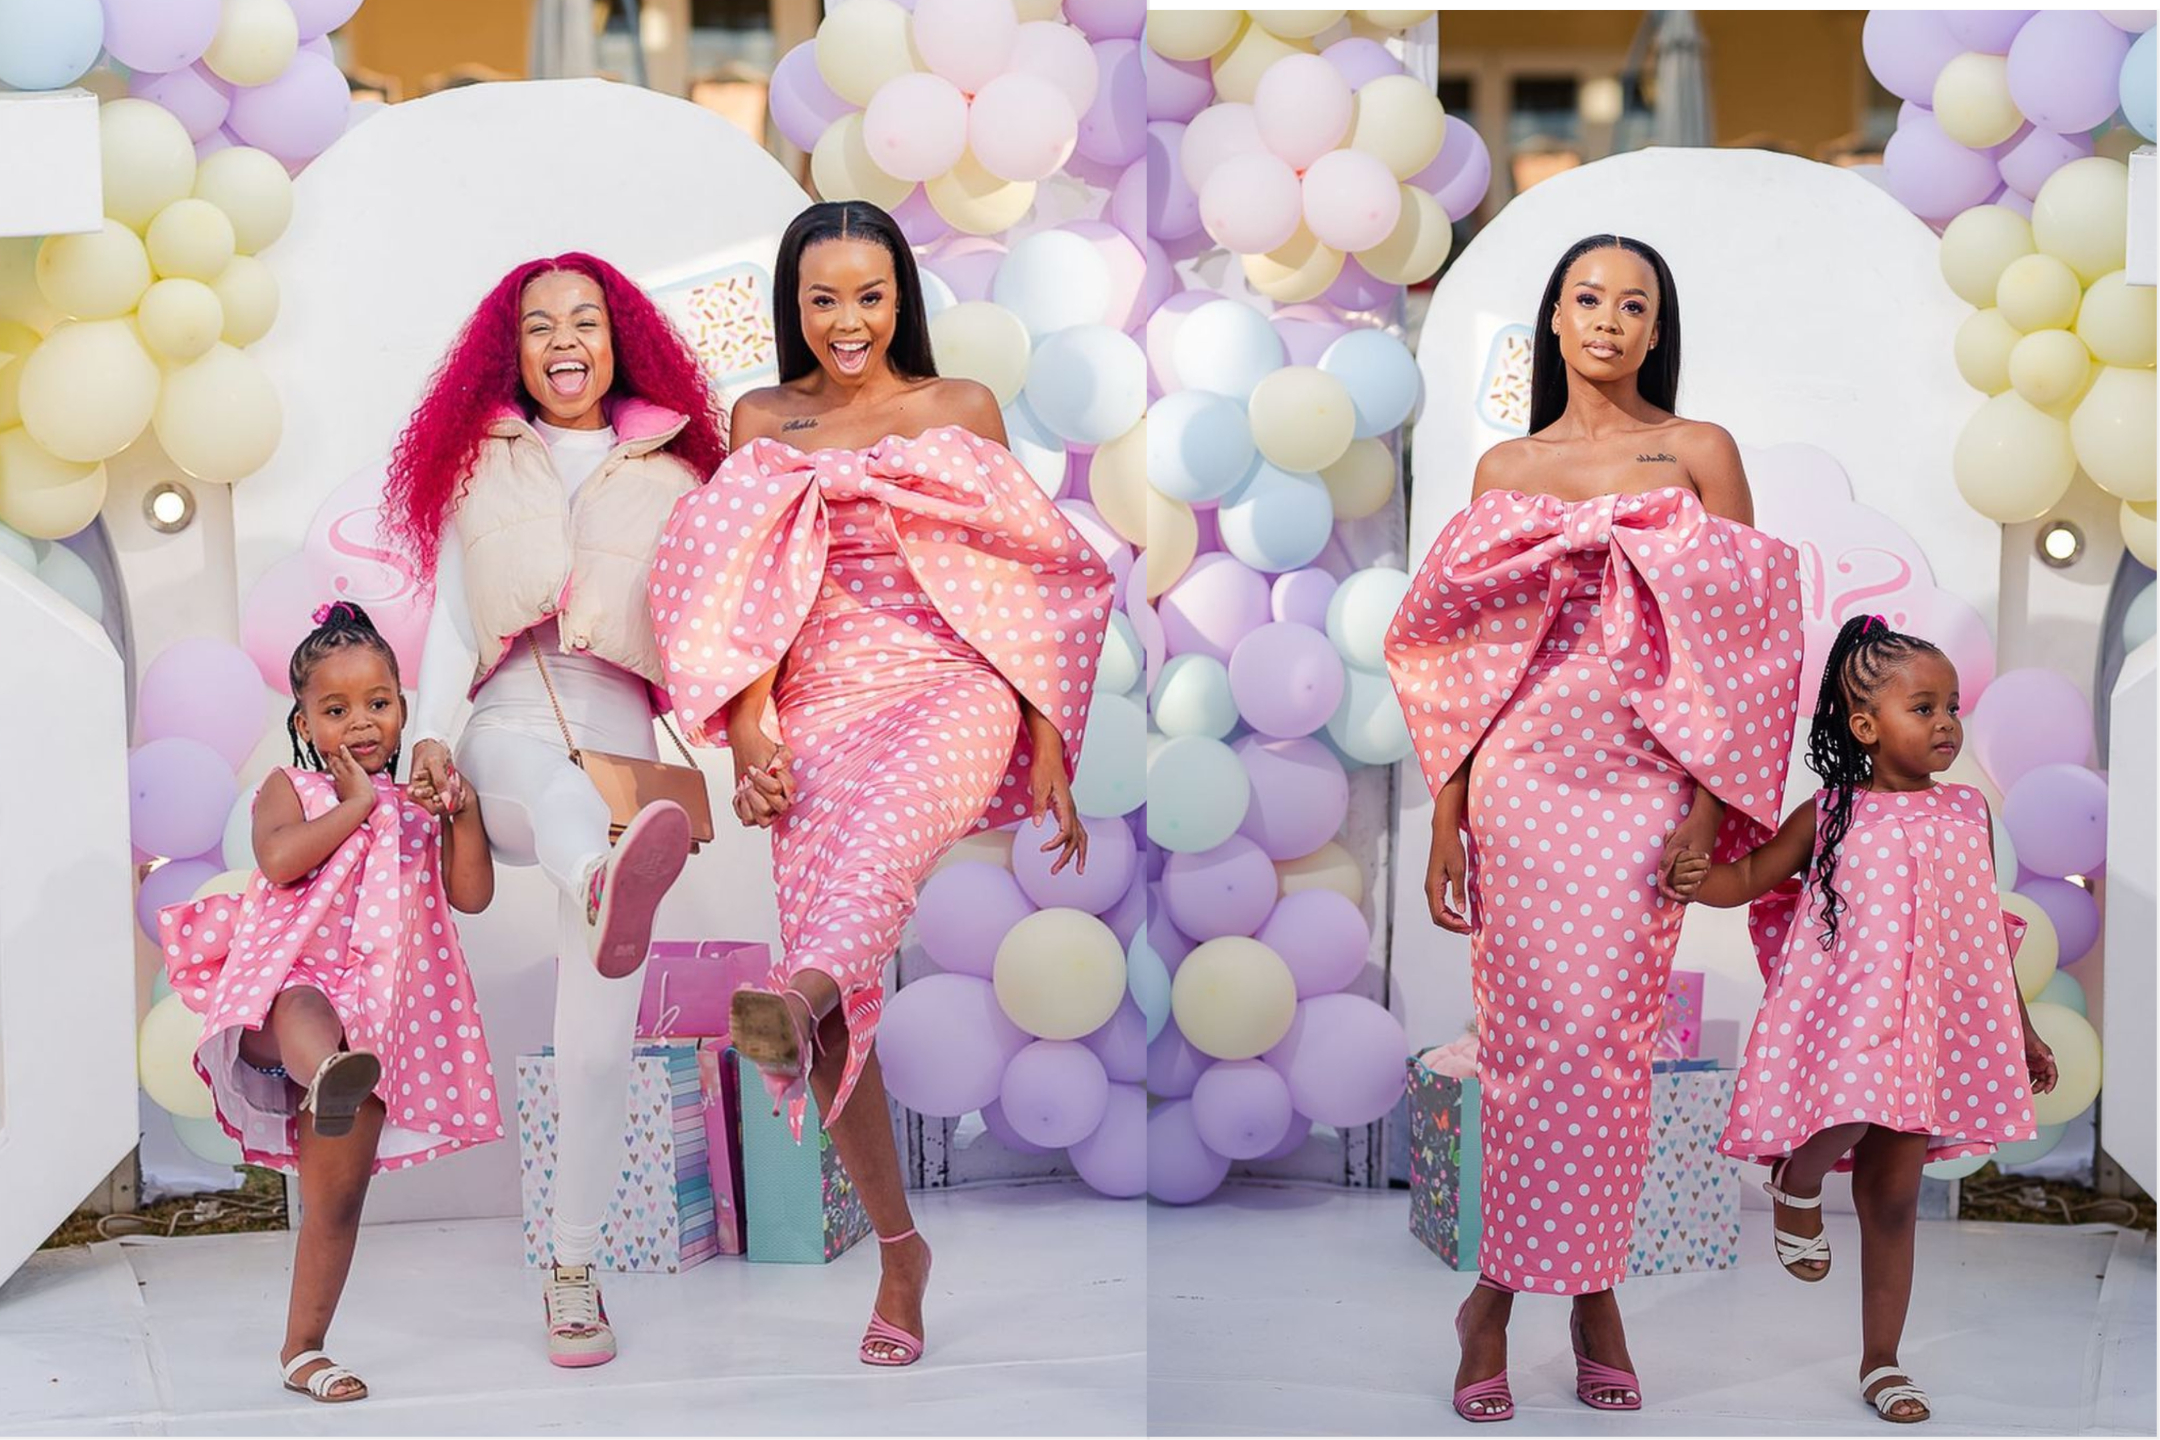 Watch: Ntando Duma’s Expensive Birthday Bash For Her Award-Winning Daughter Charms South Africa